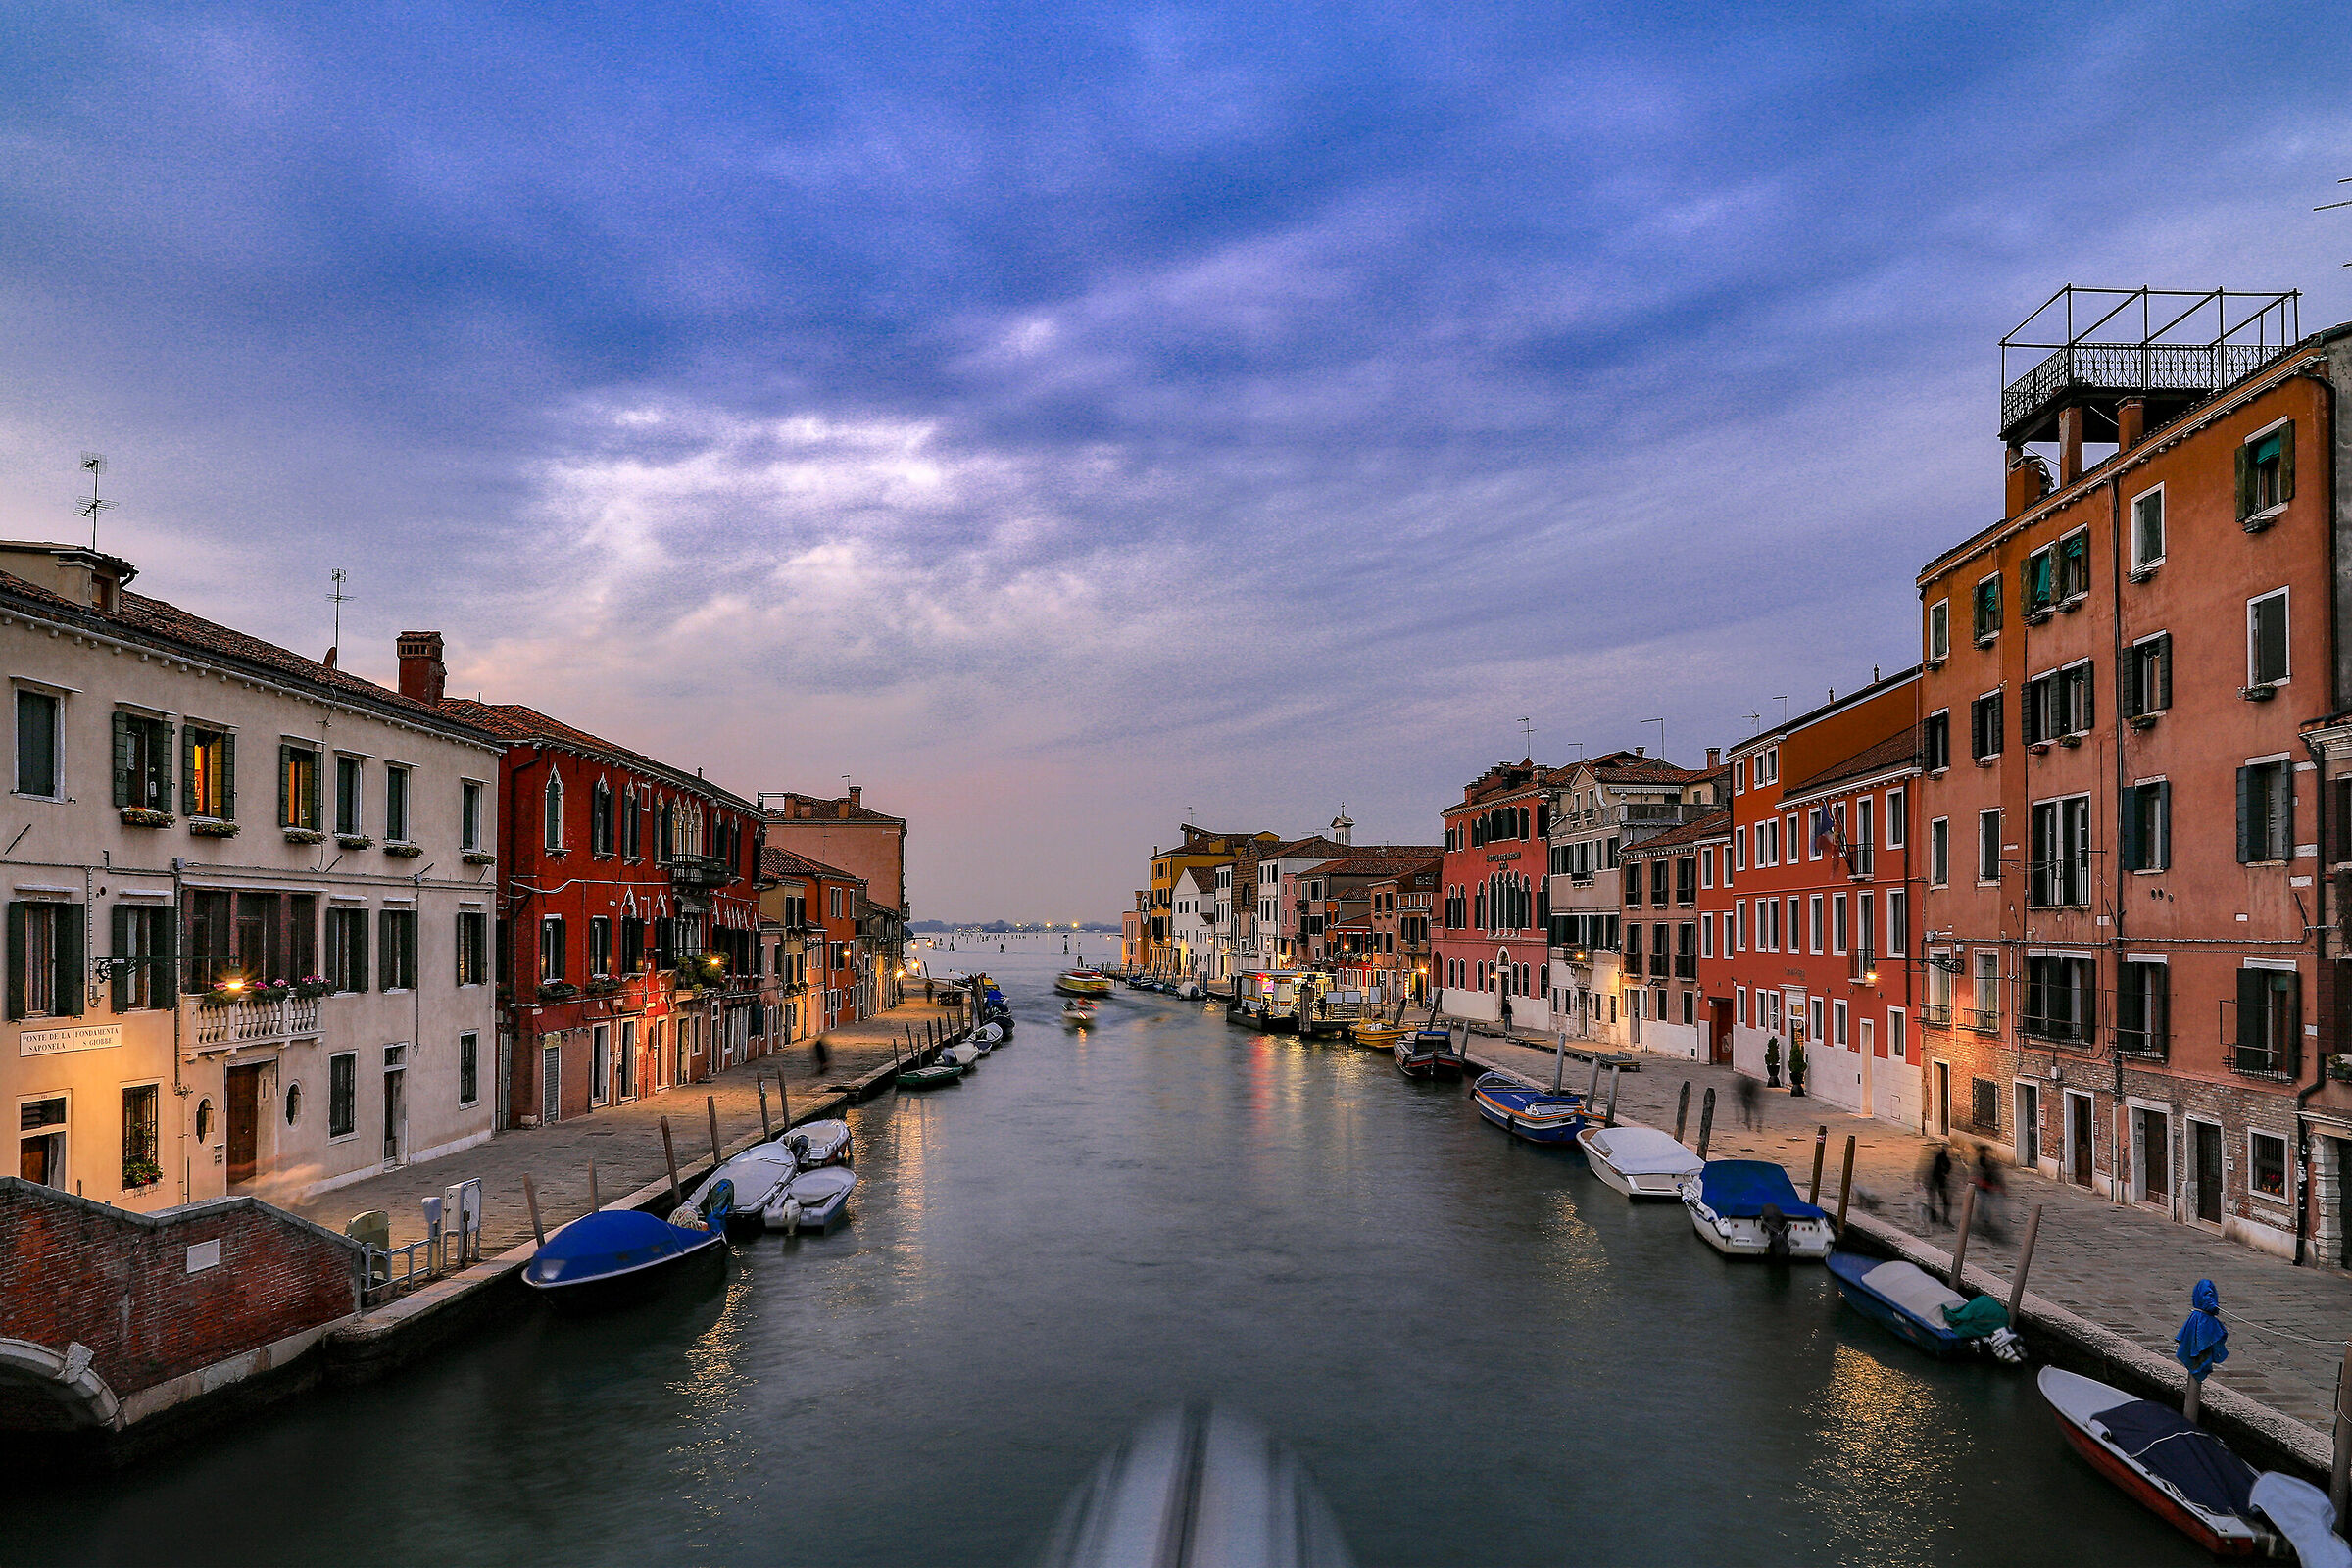 the first lights come on in Cannaregio...